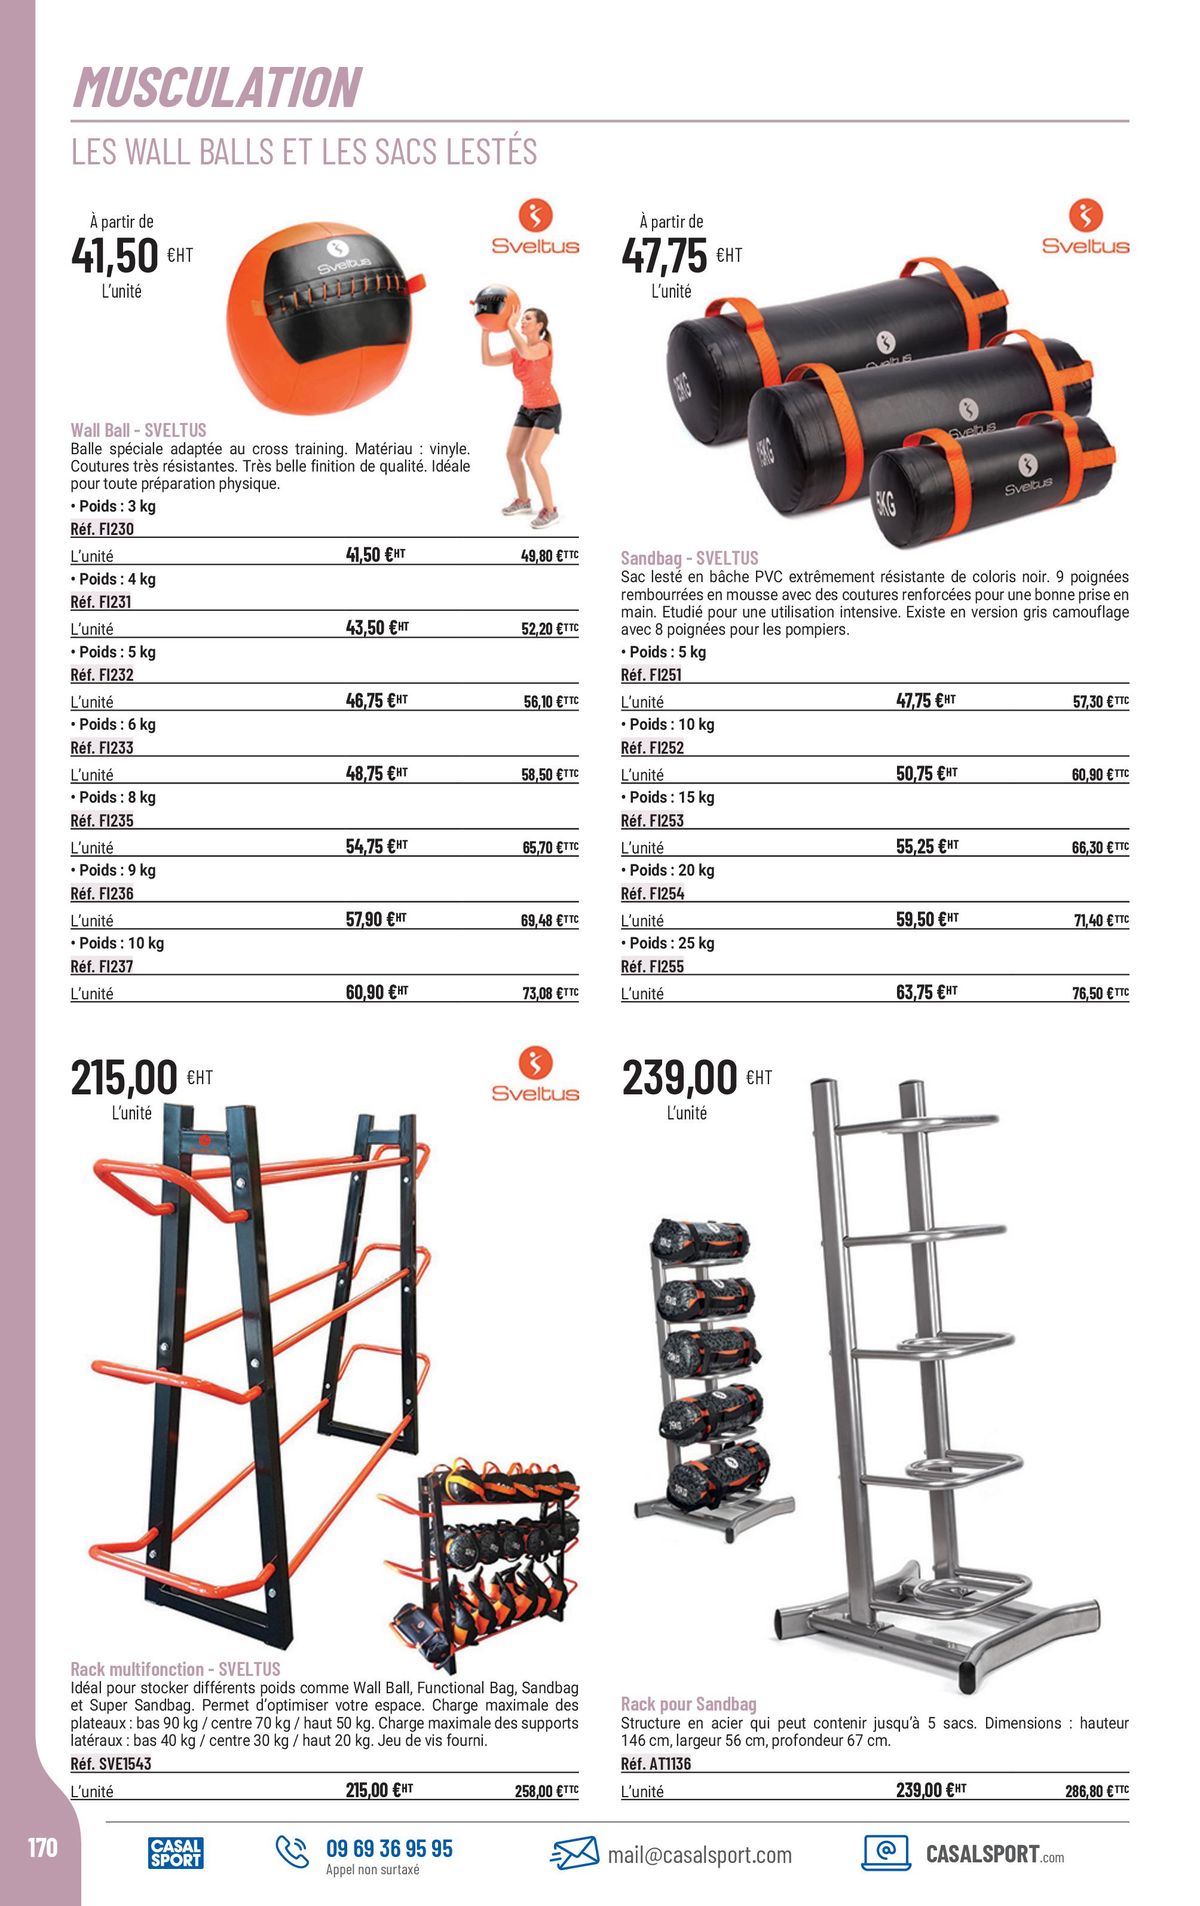 Catalogue Equipement sportif, page 00142